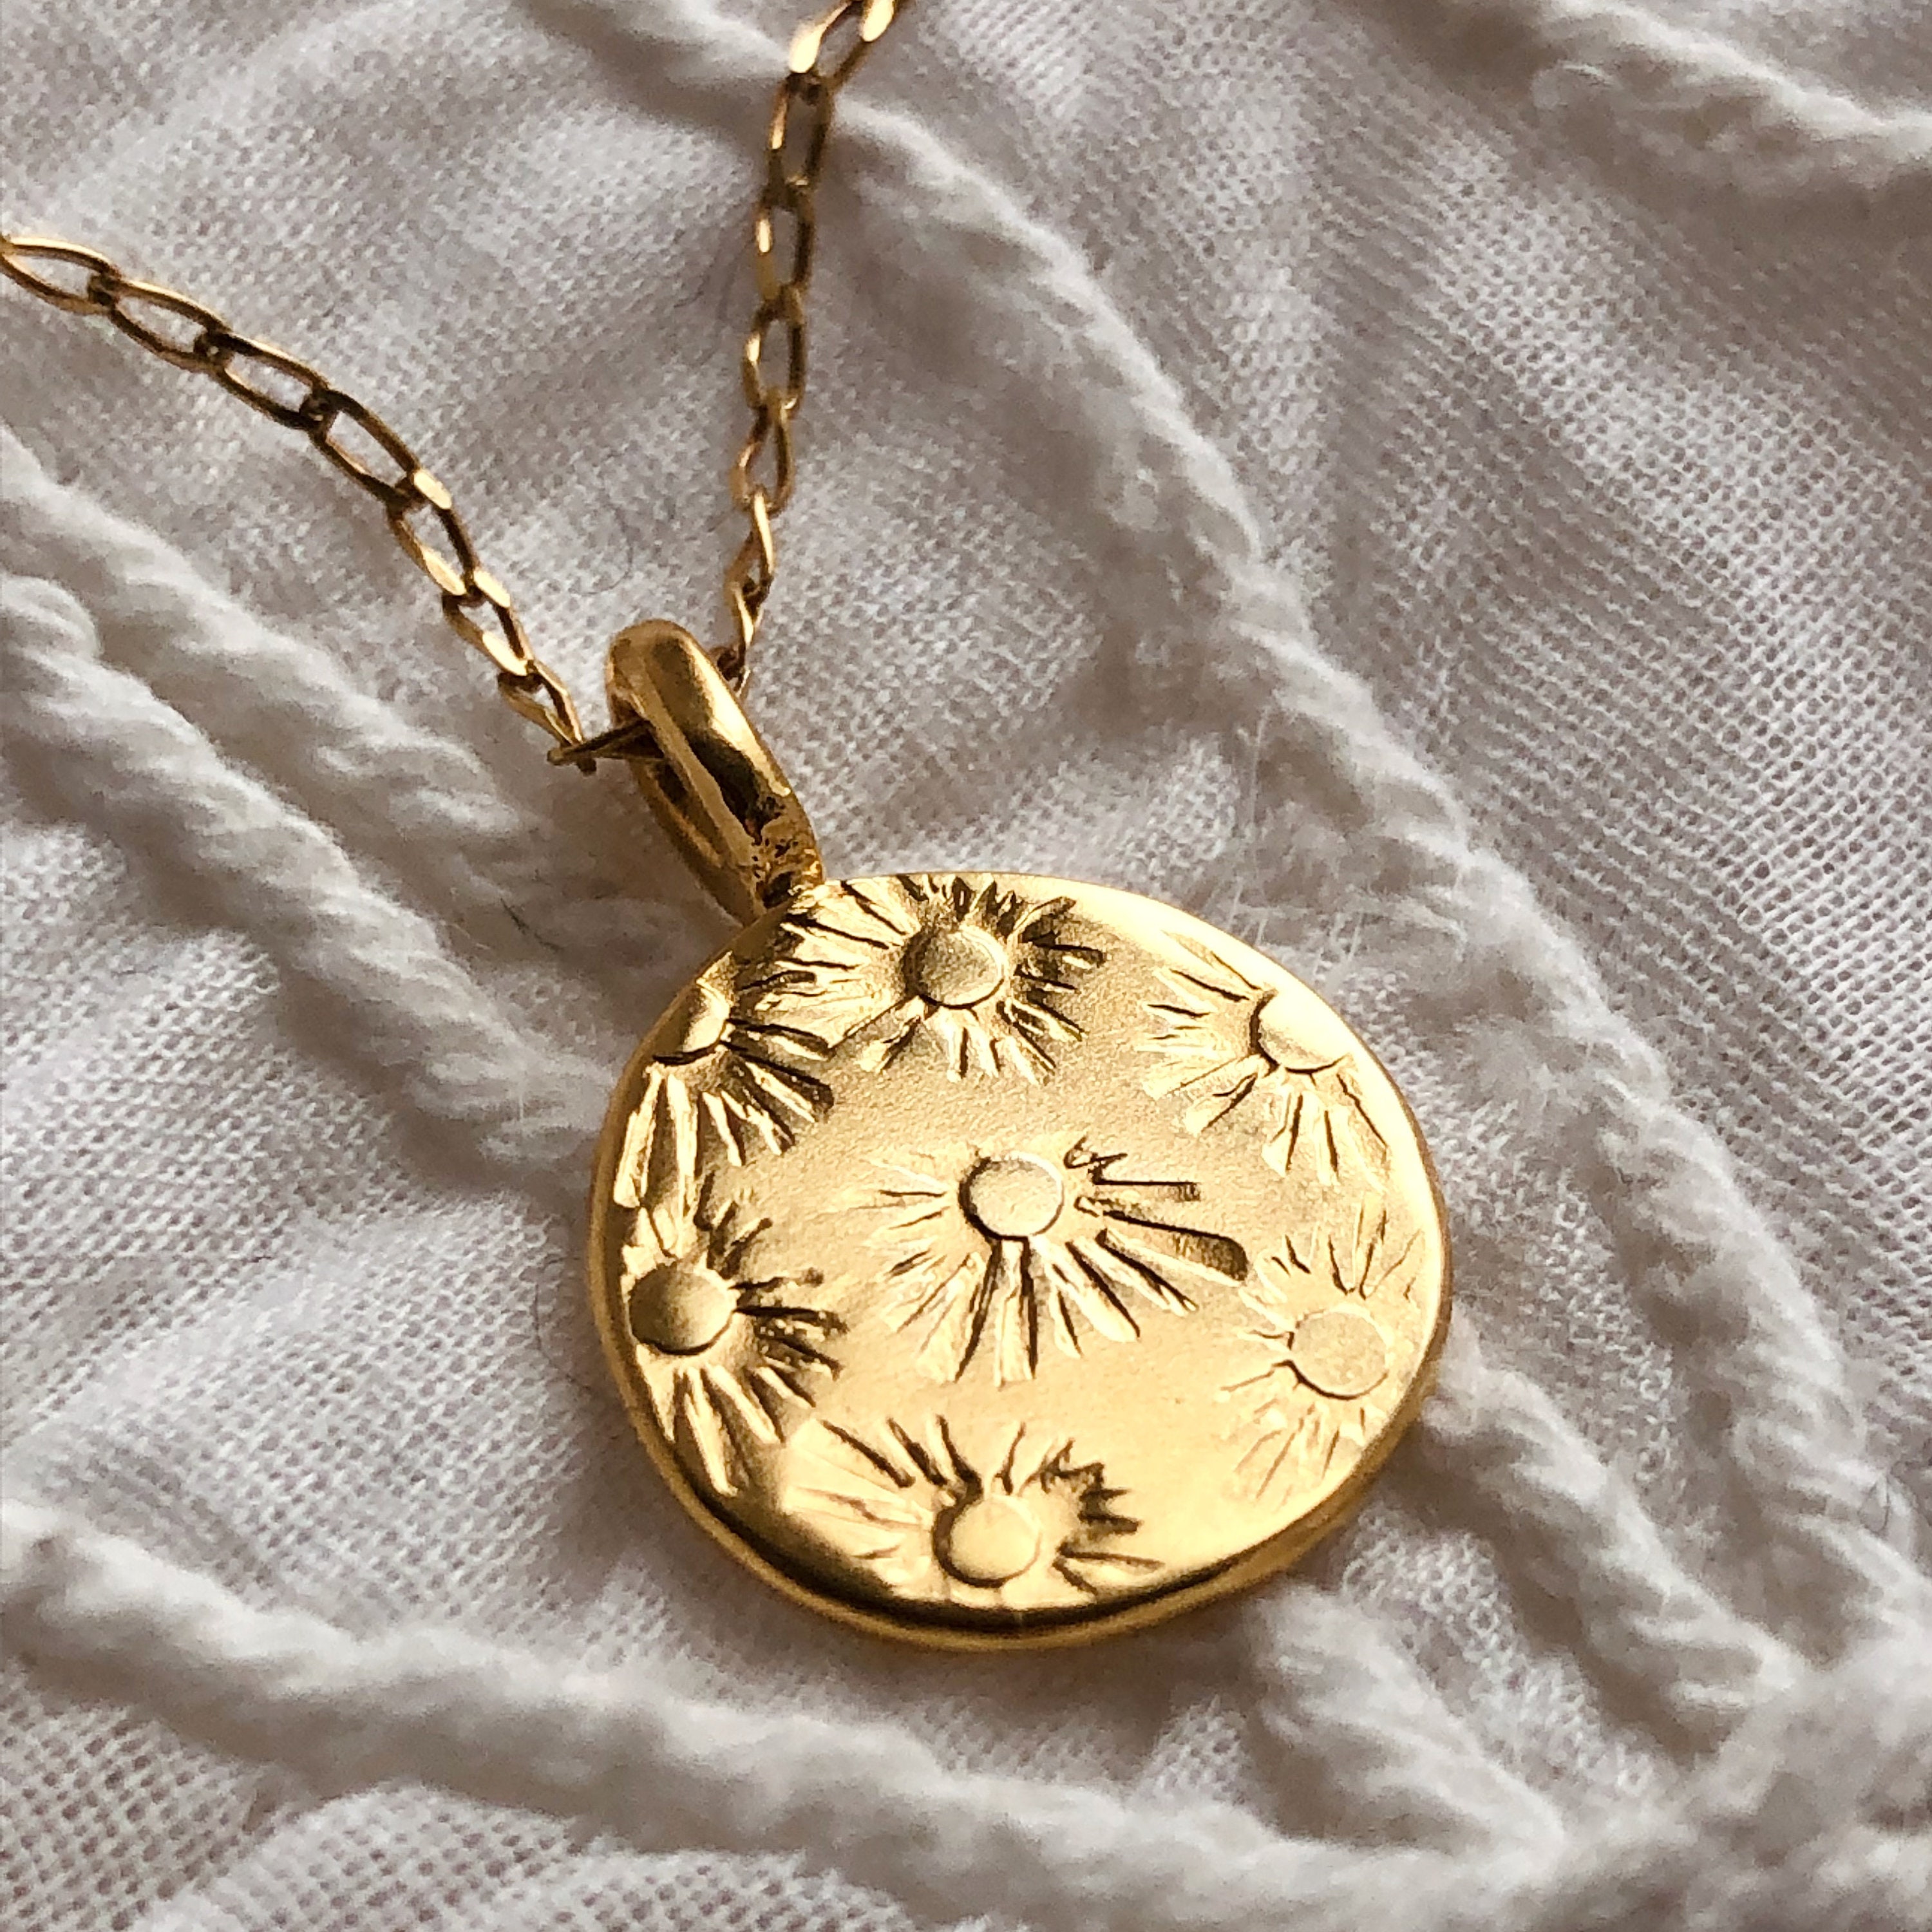 Gold Sunbeam Disc Pendant, Sun Charm Necklace, Vintage Motif, Sunshine Coin Gifts For Her